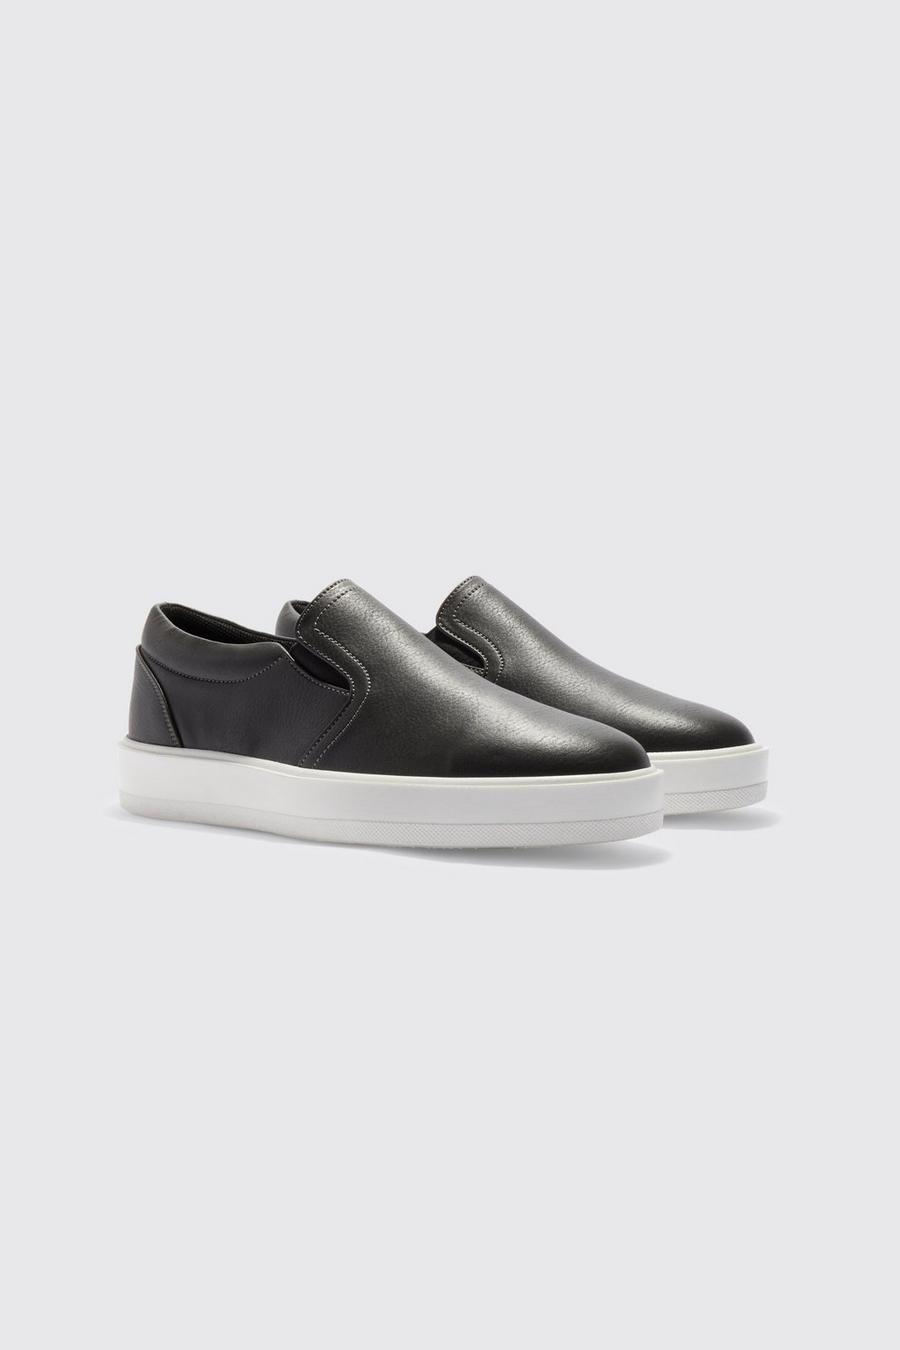 Charcoal grey Smart Faux Leather Slip On